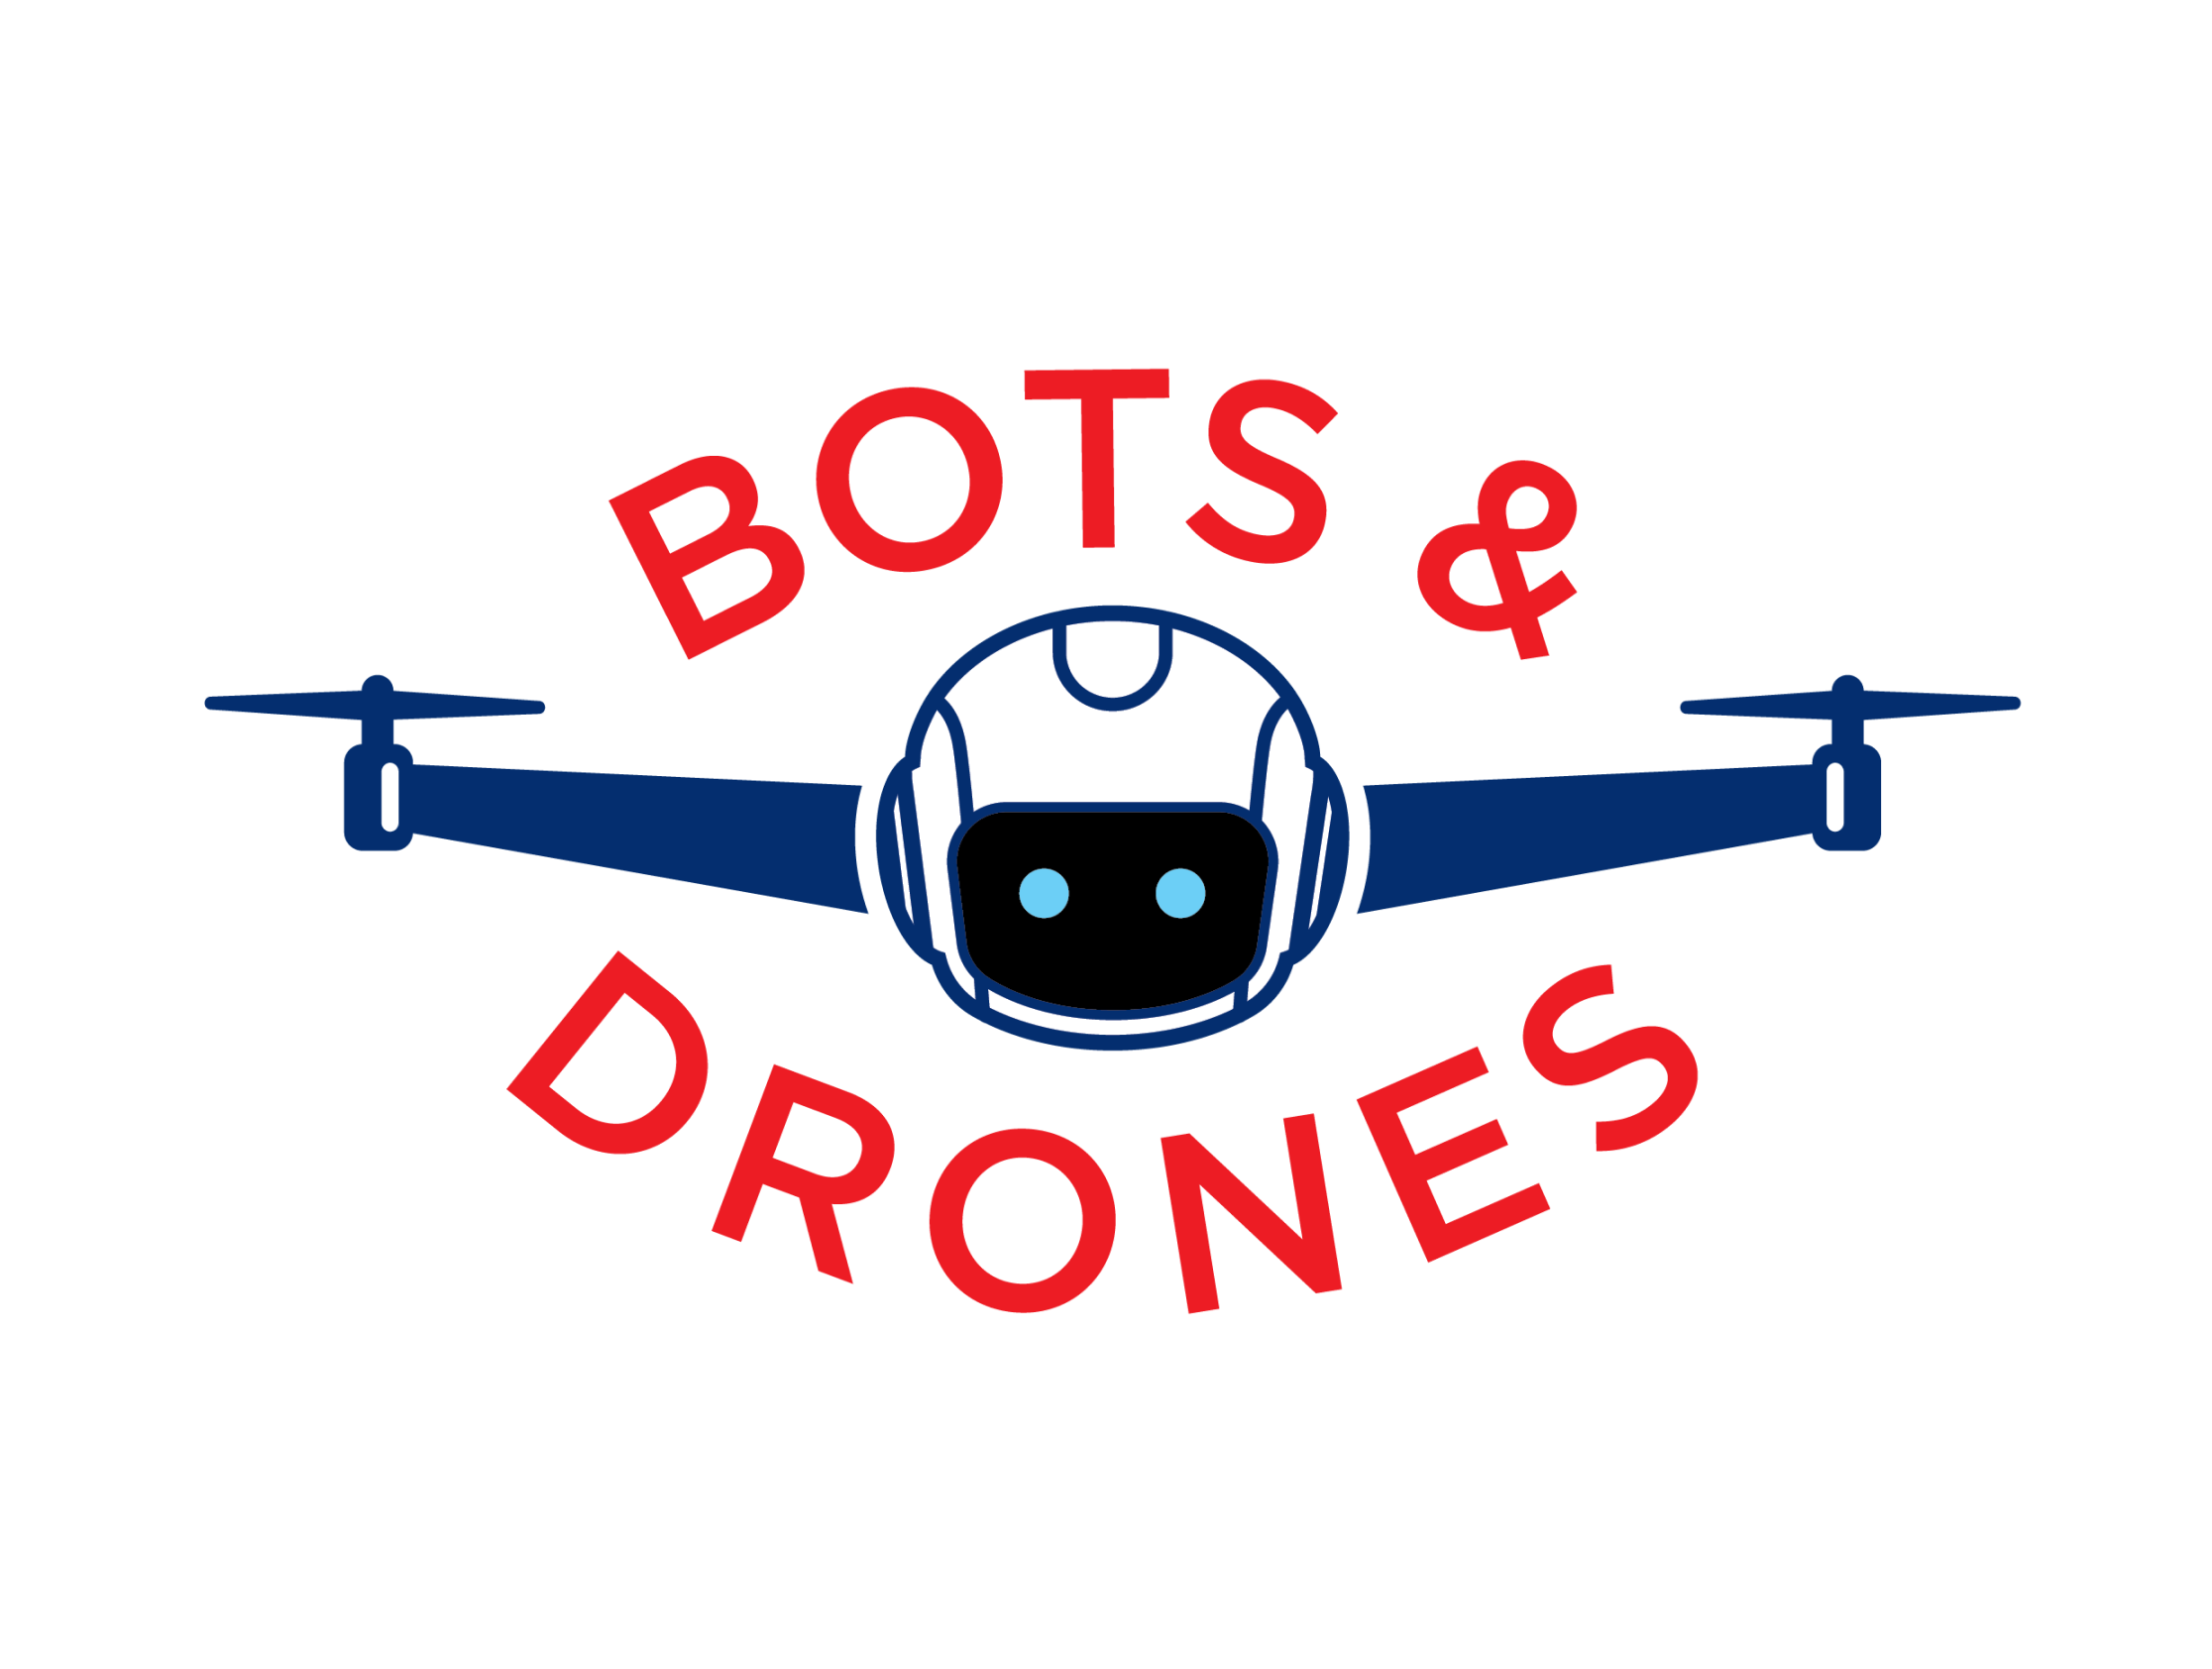 Bots_and_Drones